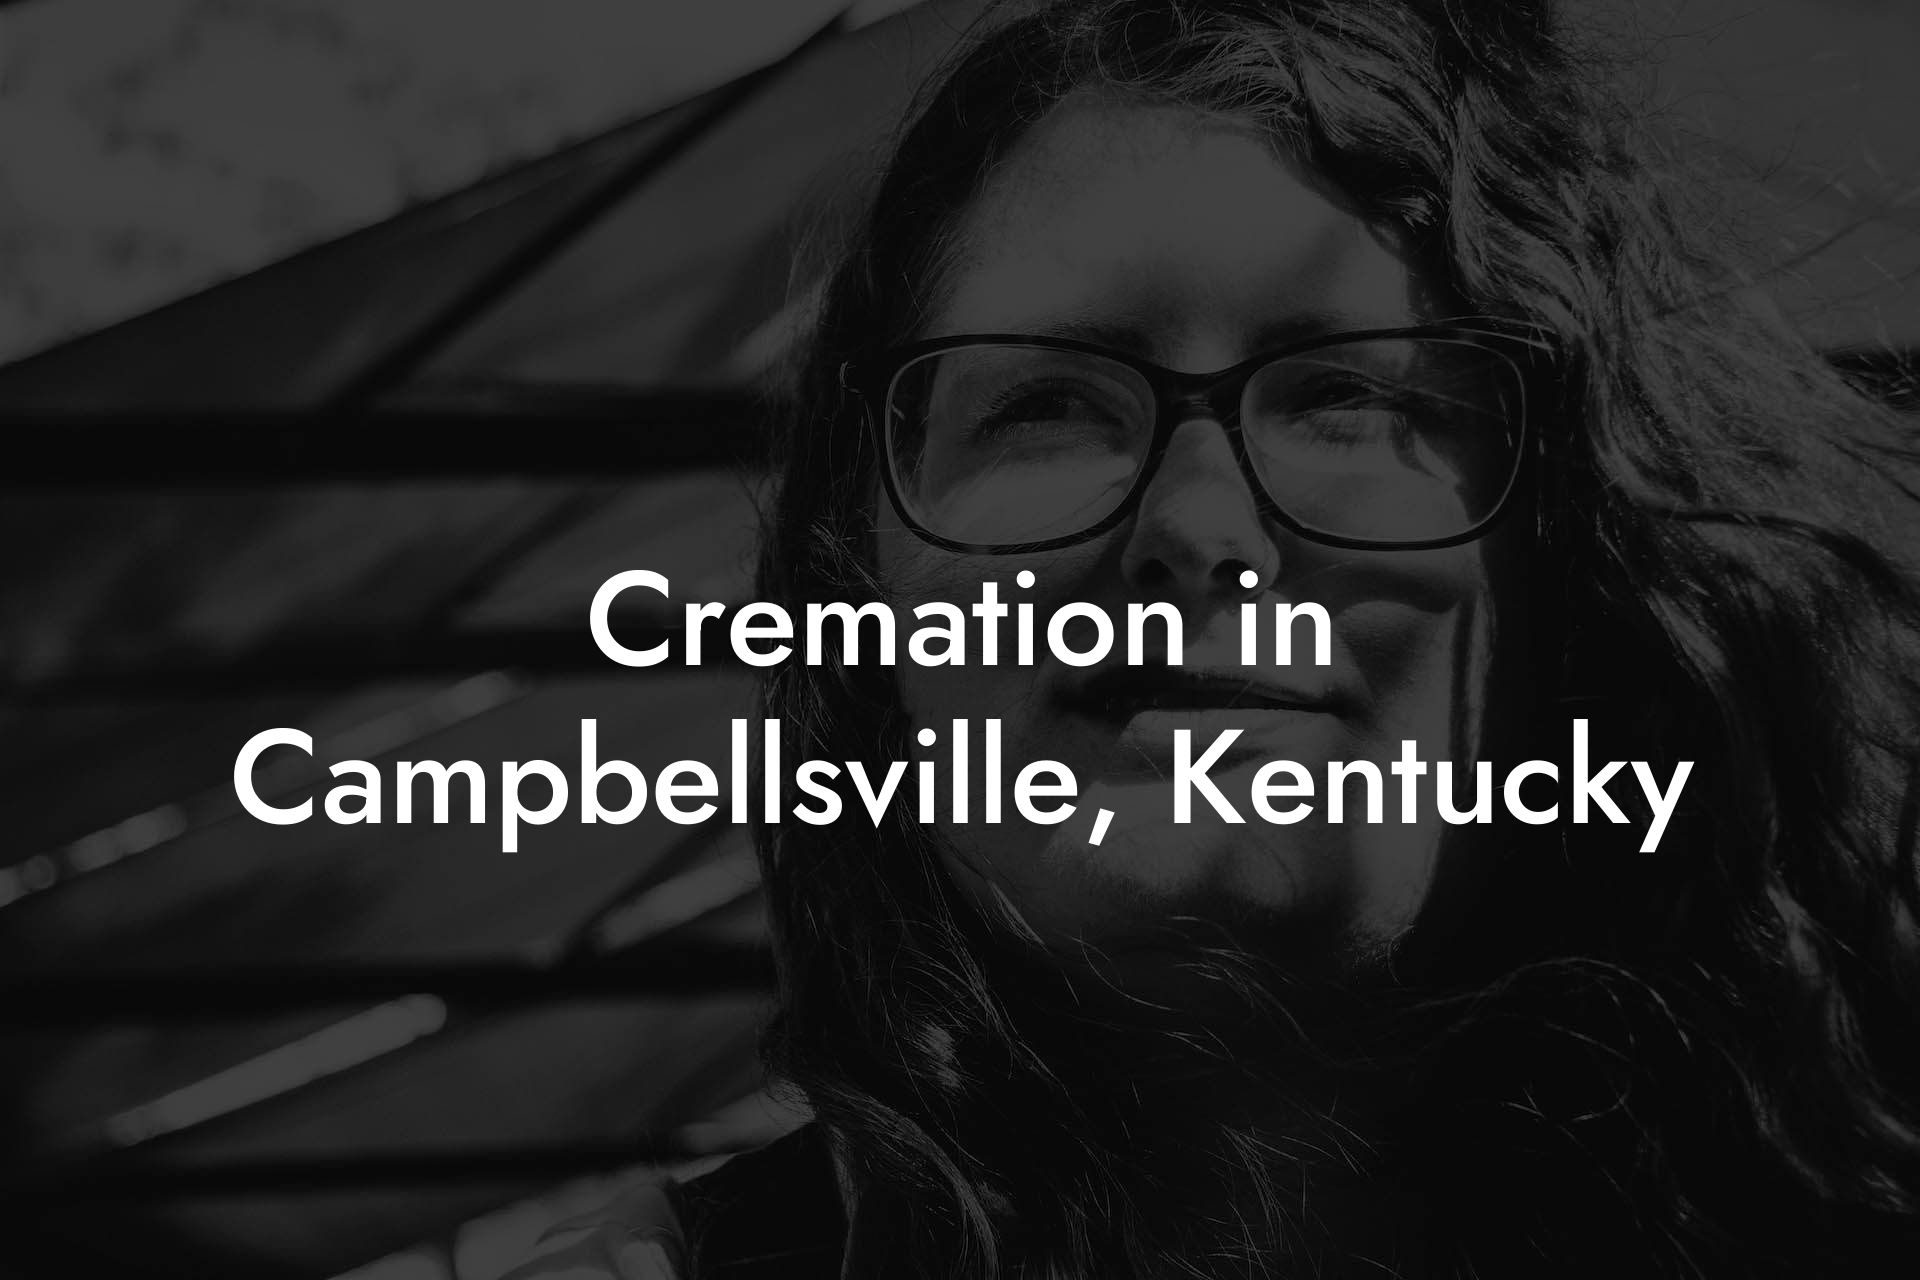 Cremation in Campbellsville, Kentucky